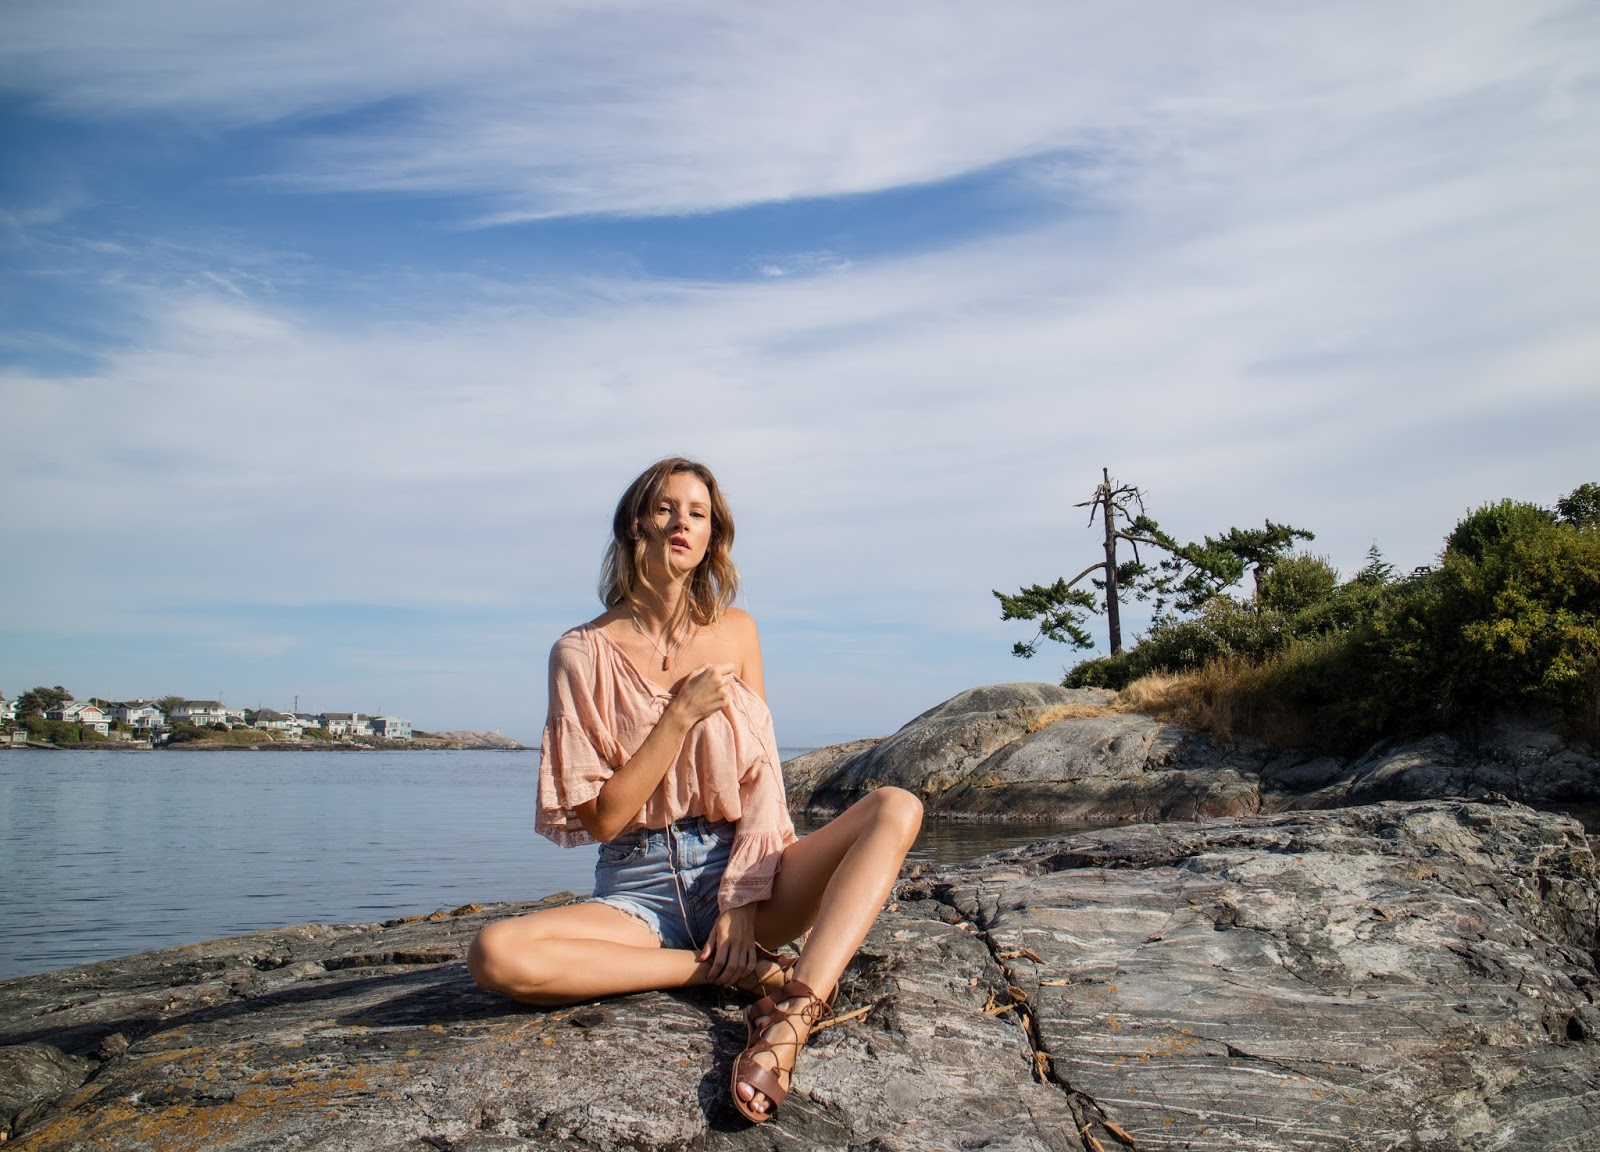 fashion blogger, Alison Hutchinson, is wearing a Zara boho off the shoulder blouse, ksubi denim cutoffs, and gladiator sandals at the beach in Victoria